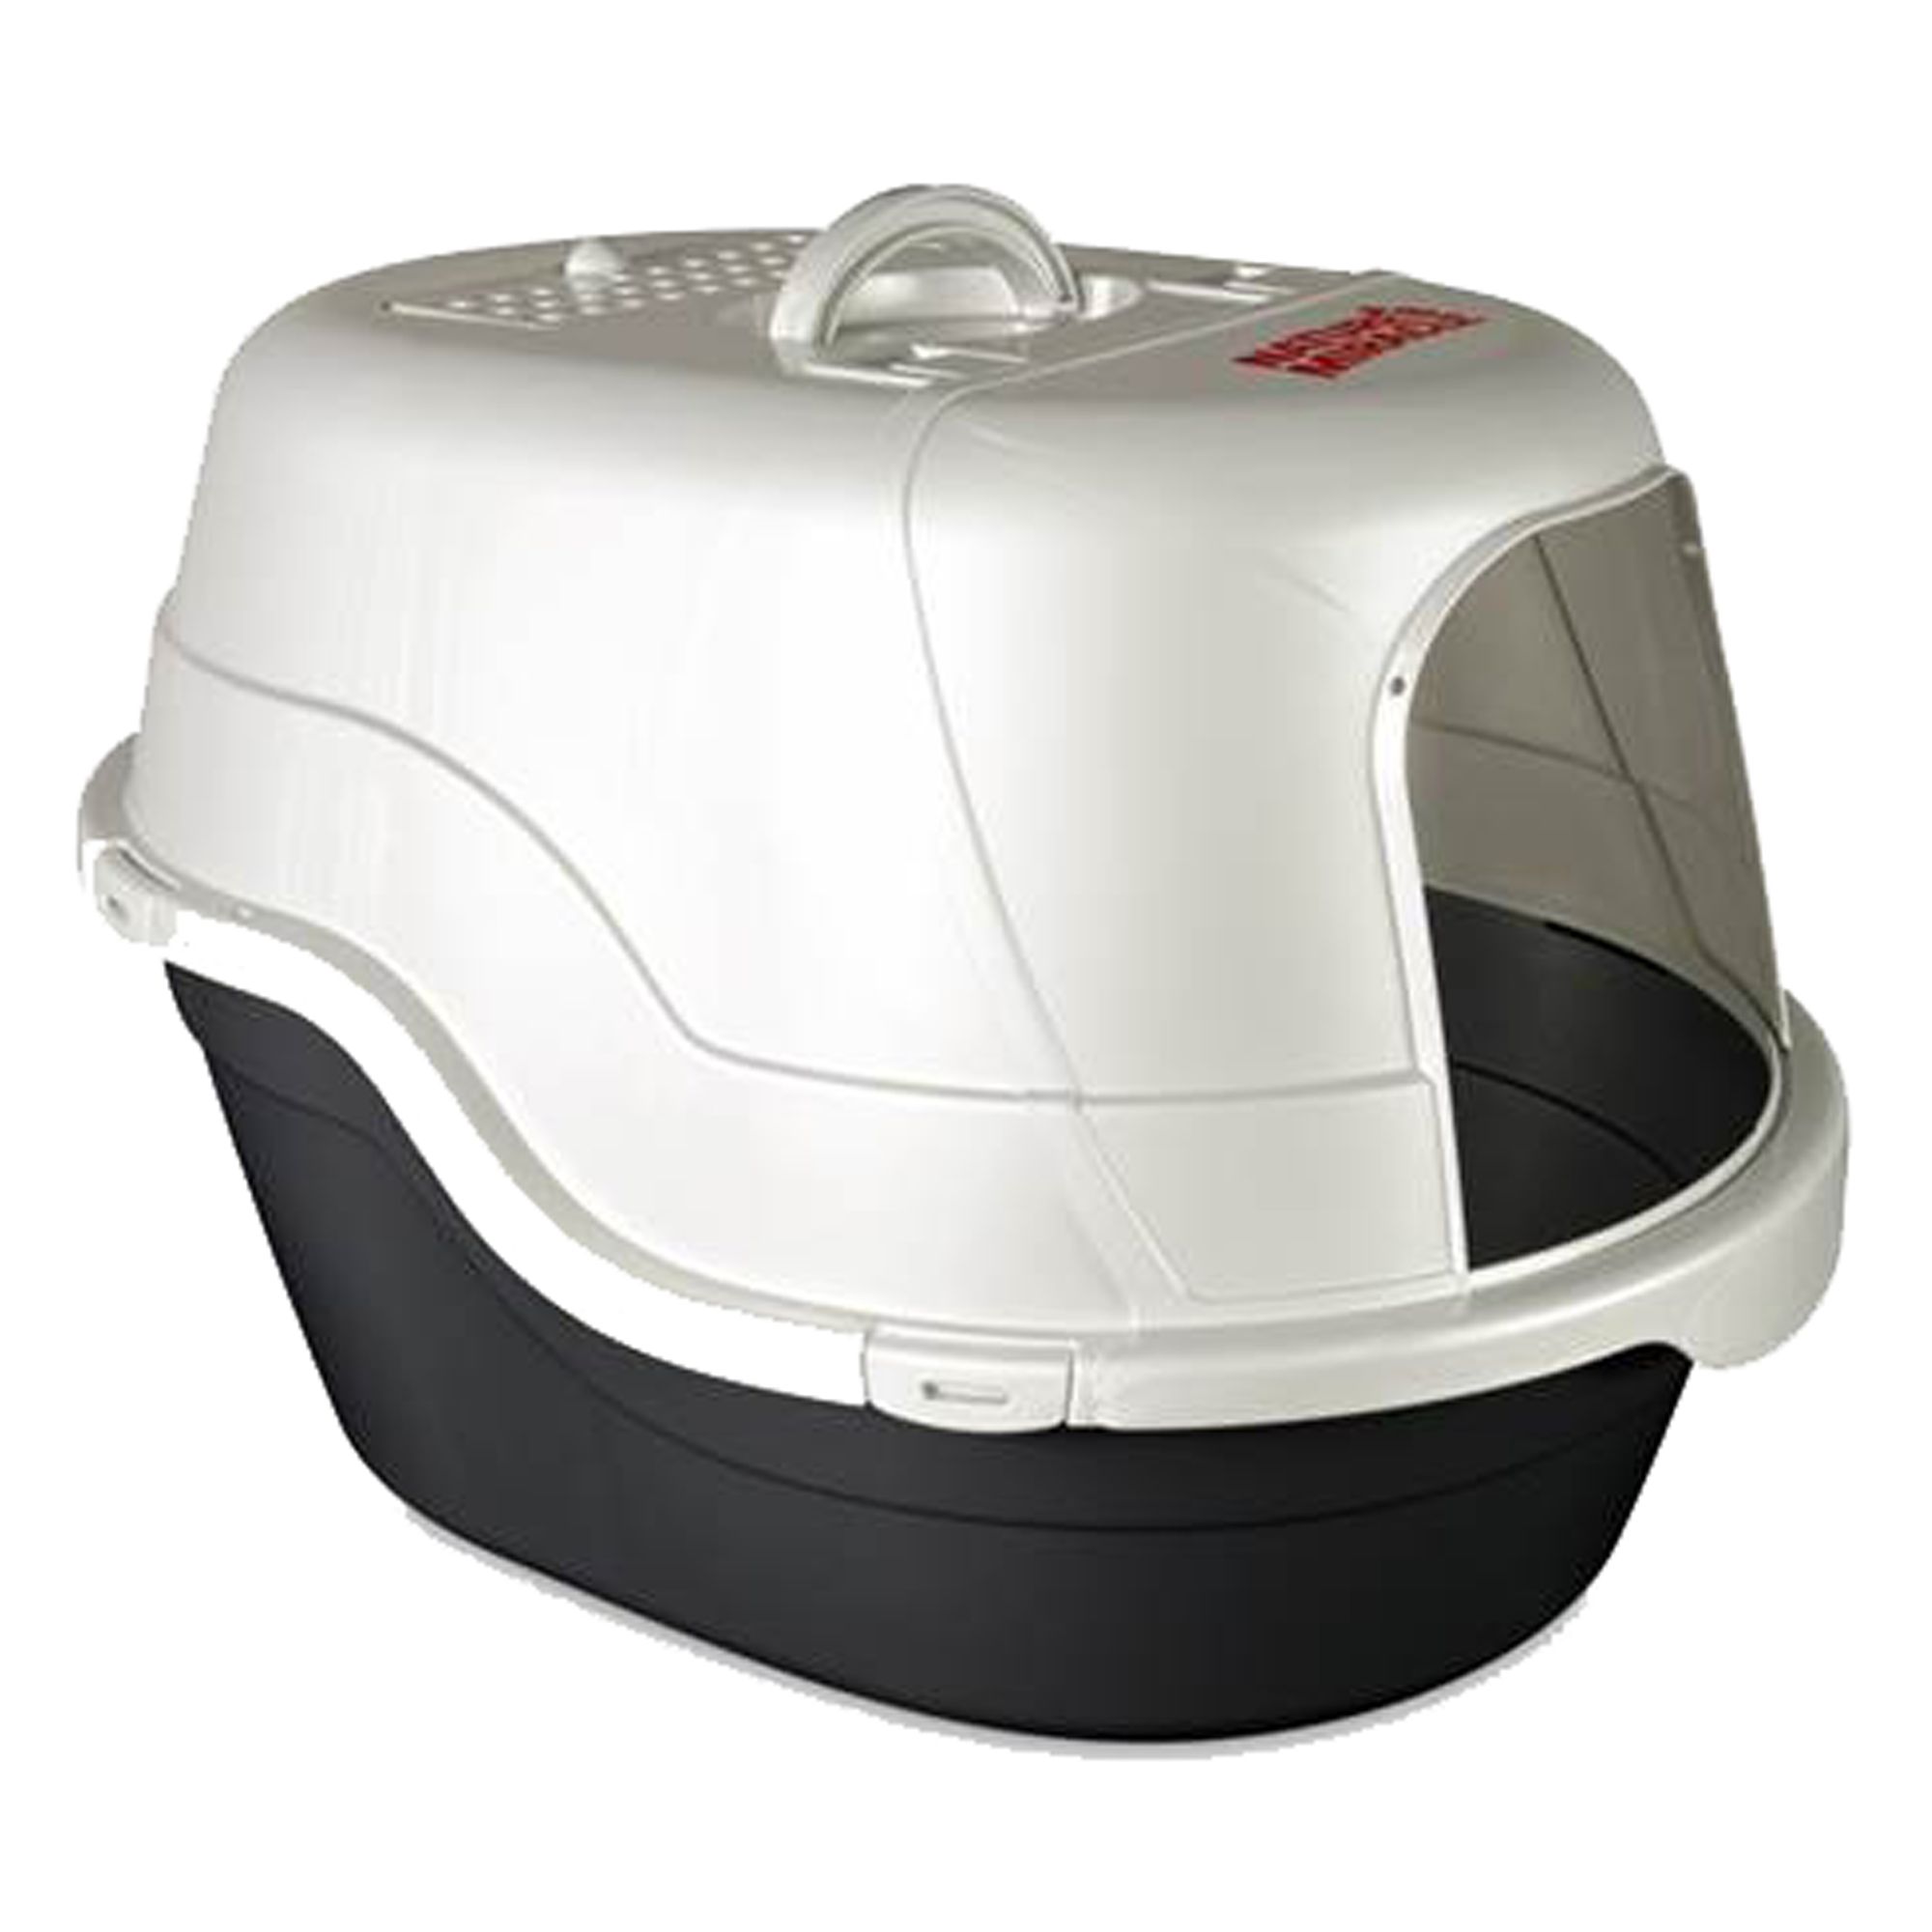 nature's miracle advanced corner hooded cat litter box